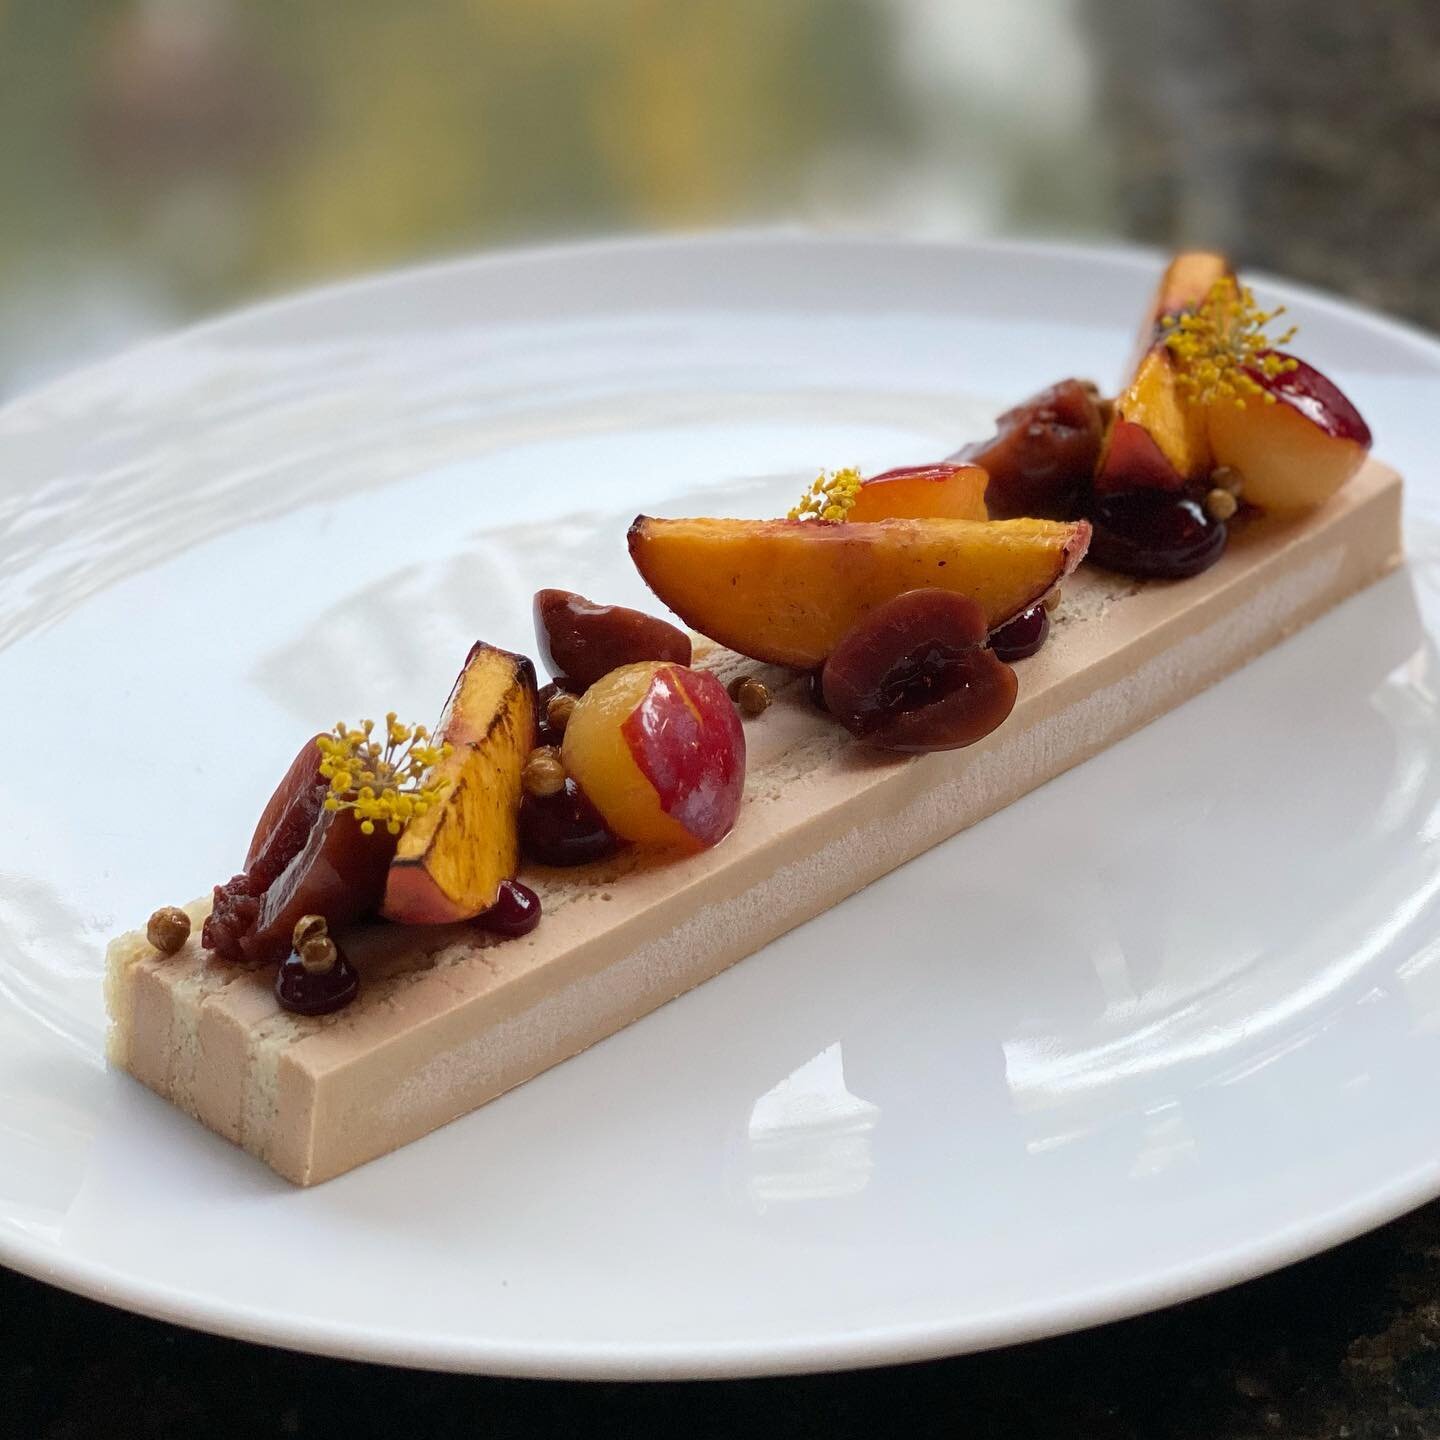 A touch of sweetness for hump day!📍 @barndivahealdsburg | 📸: Caramel Semifreddo - blackberry miso, torched nectarine, candied coriander, dapple dandy pluots, pickled mulberry || #weinanddine